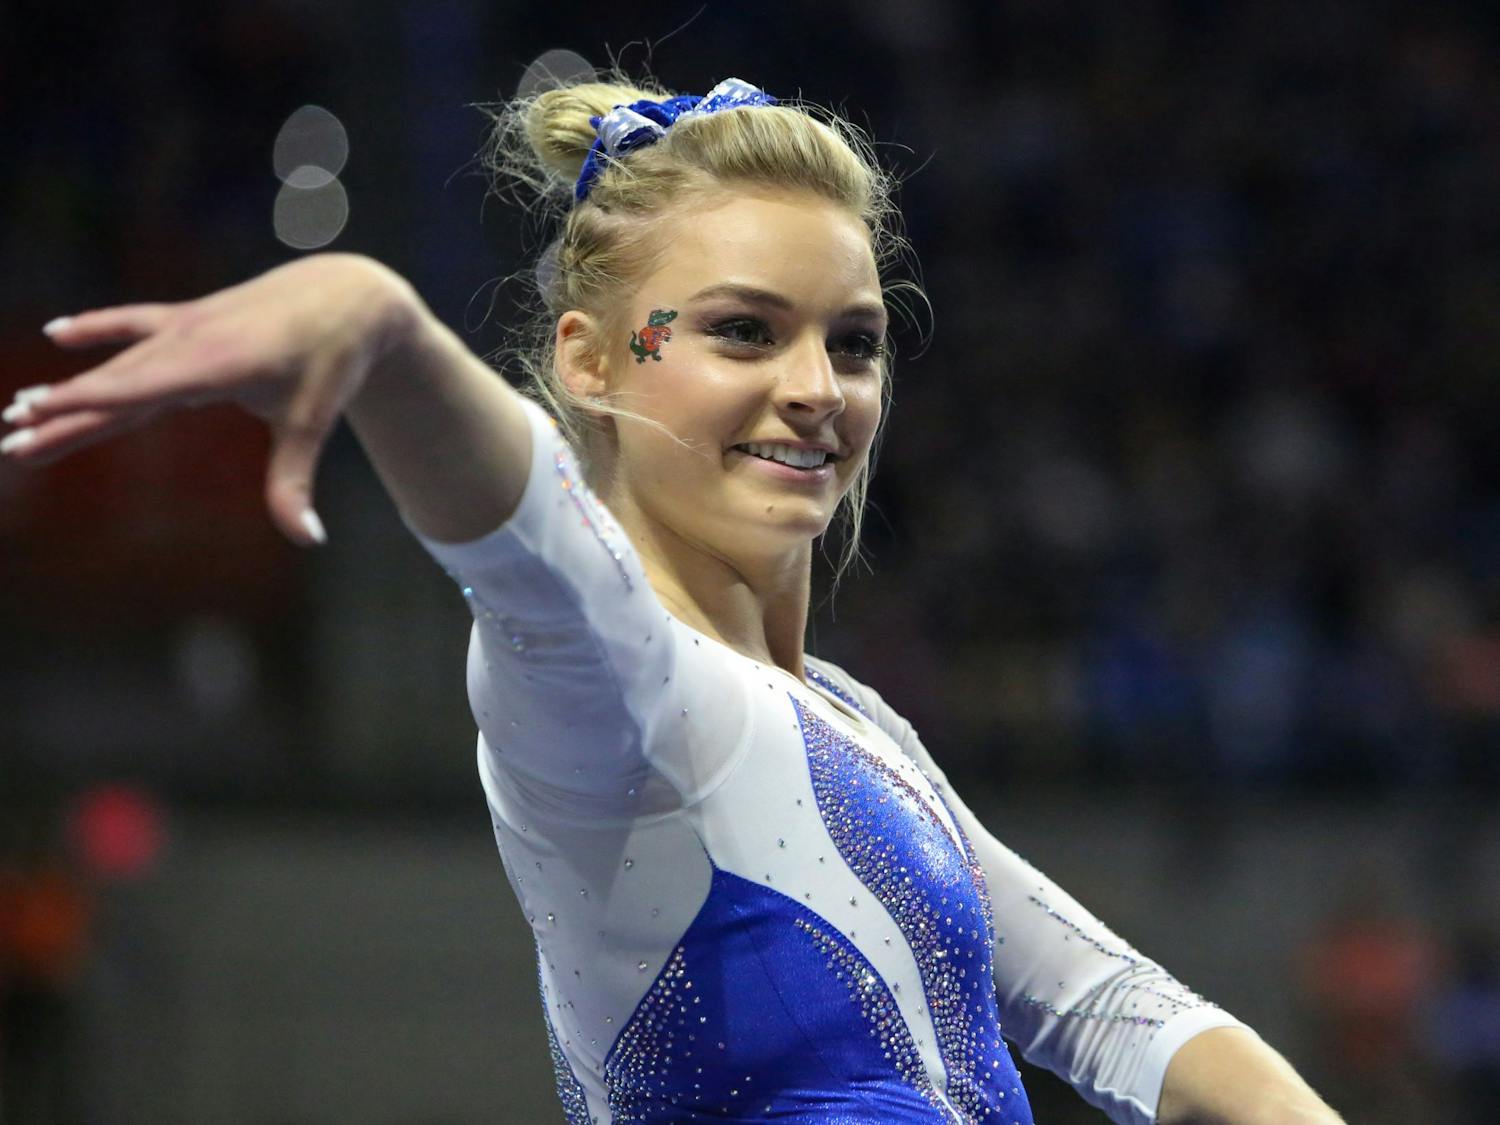 UF gymnast Alyssa Baumann was taken to Shands Hospital for a precautionary evaluation after falling off the uneven bars in practice. 